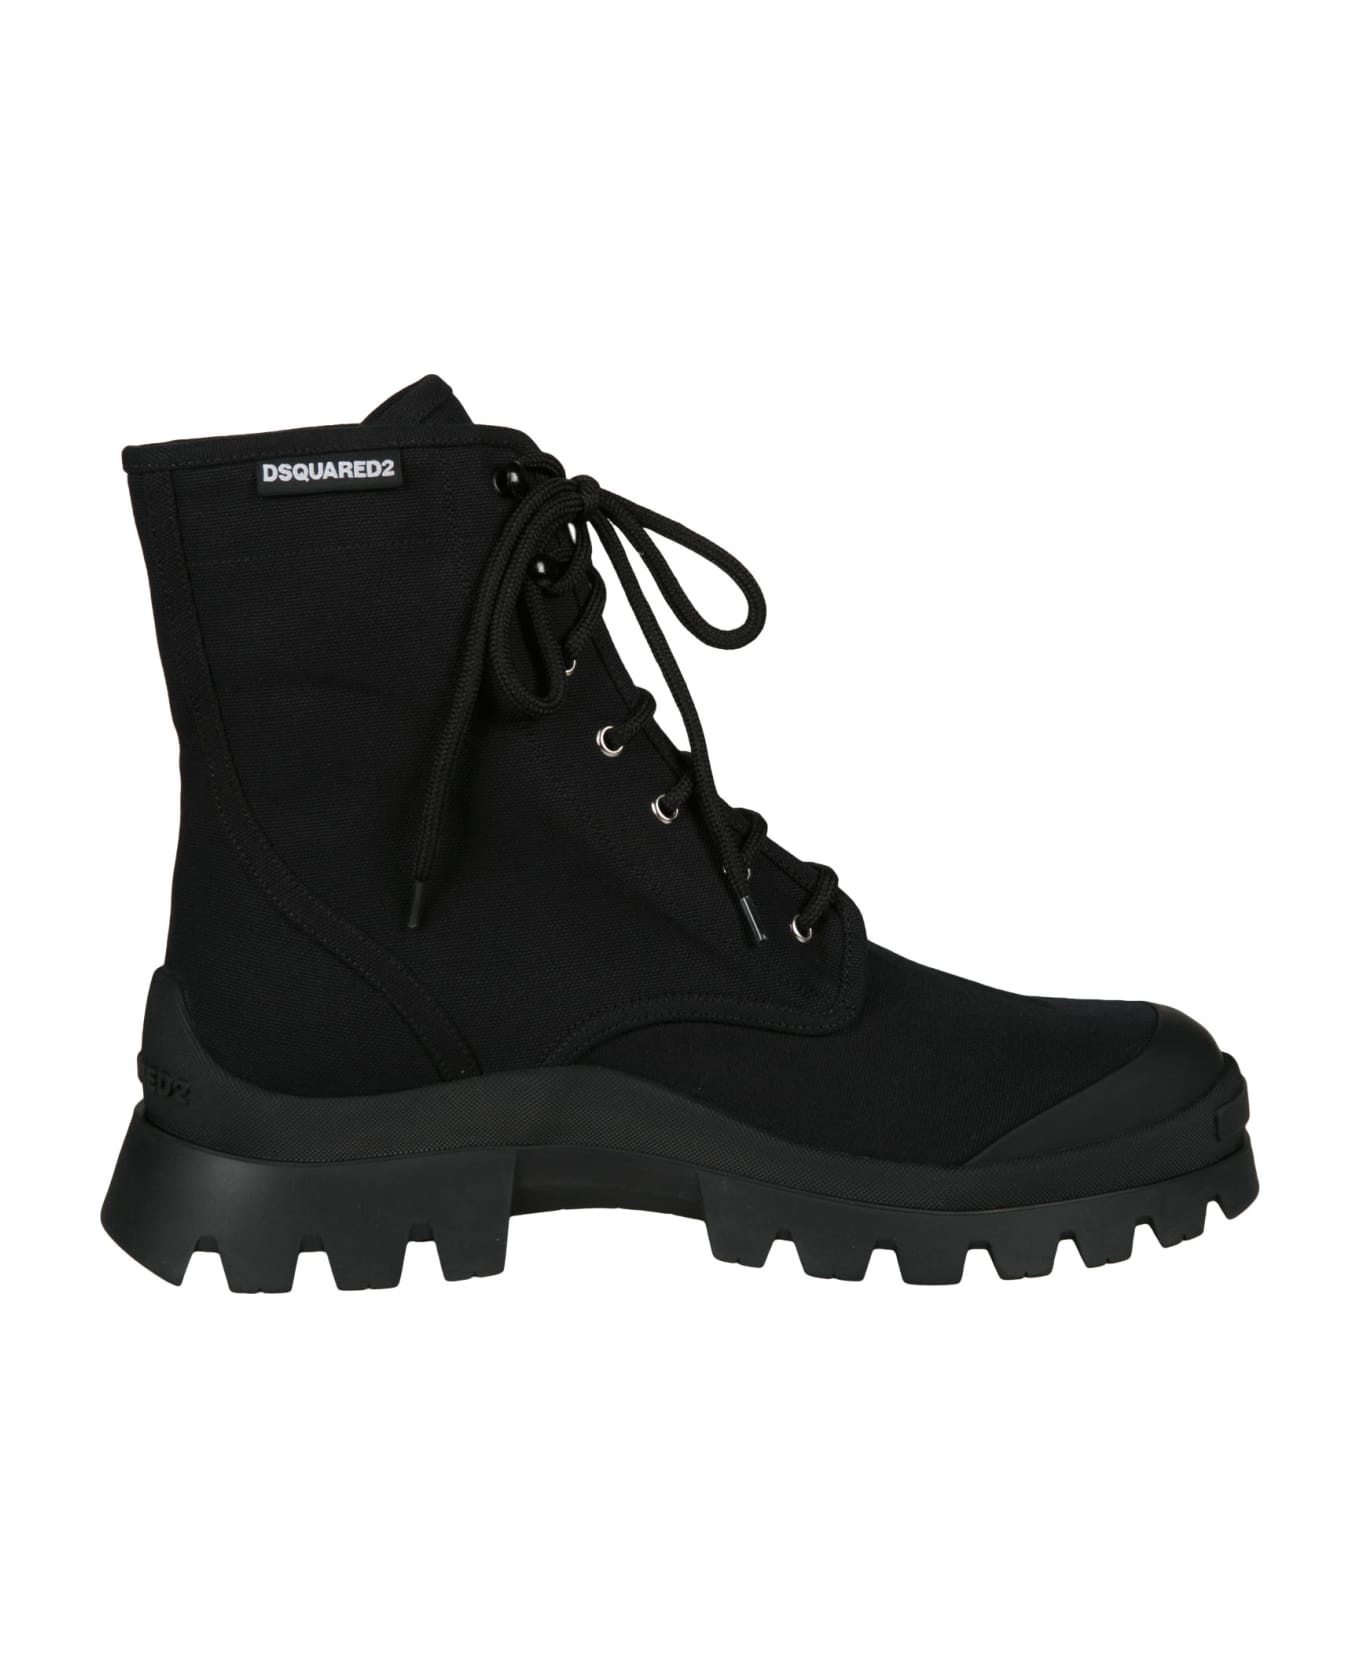 Dsquared2 Logo Lace-up Boots - Black